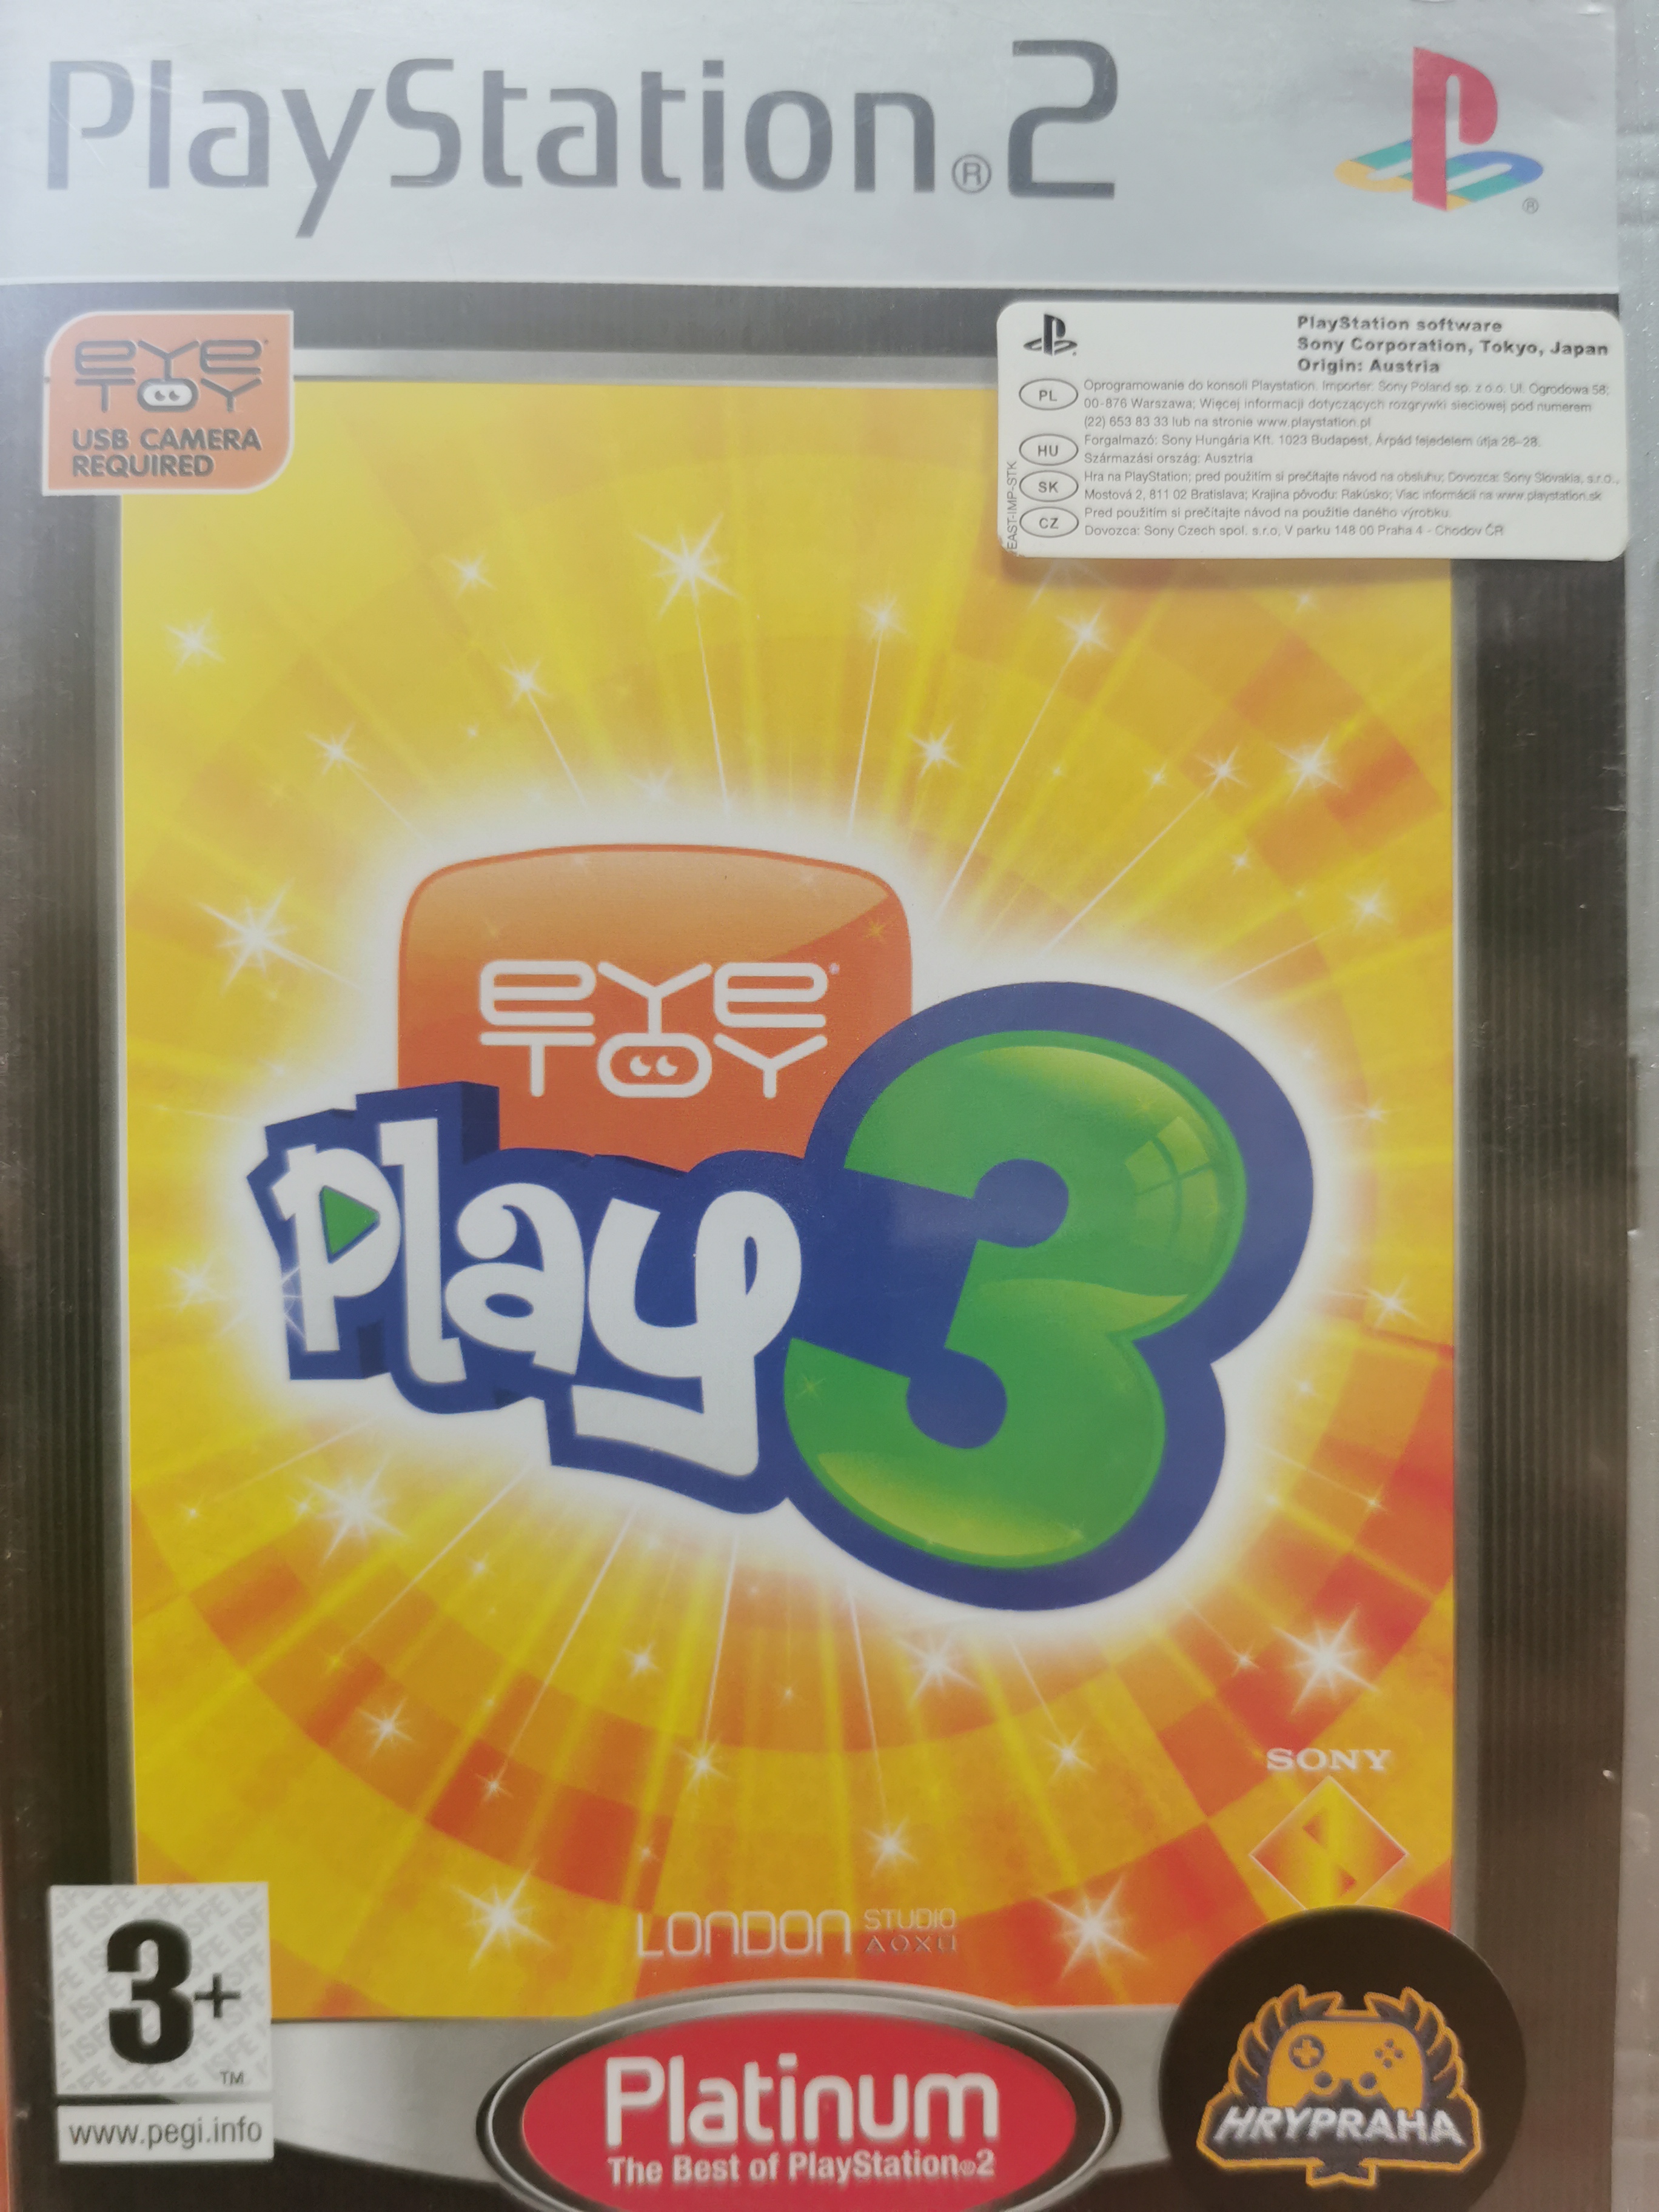 Eye toy: Play 3 PS2